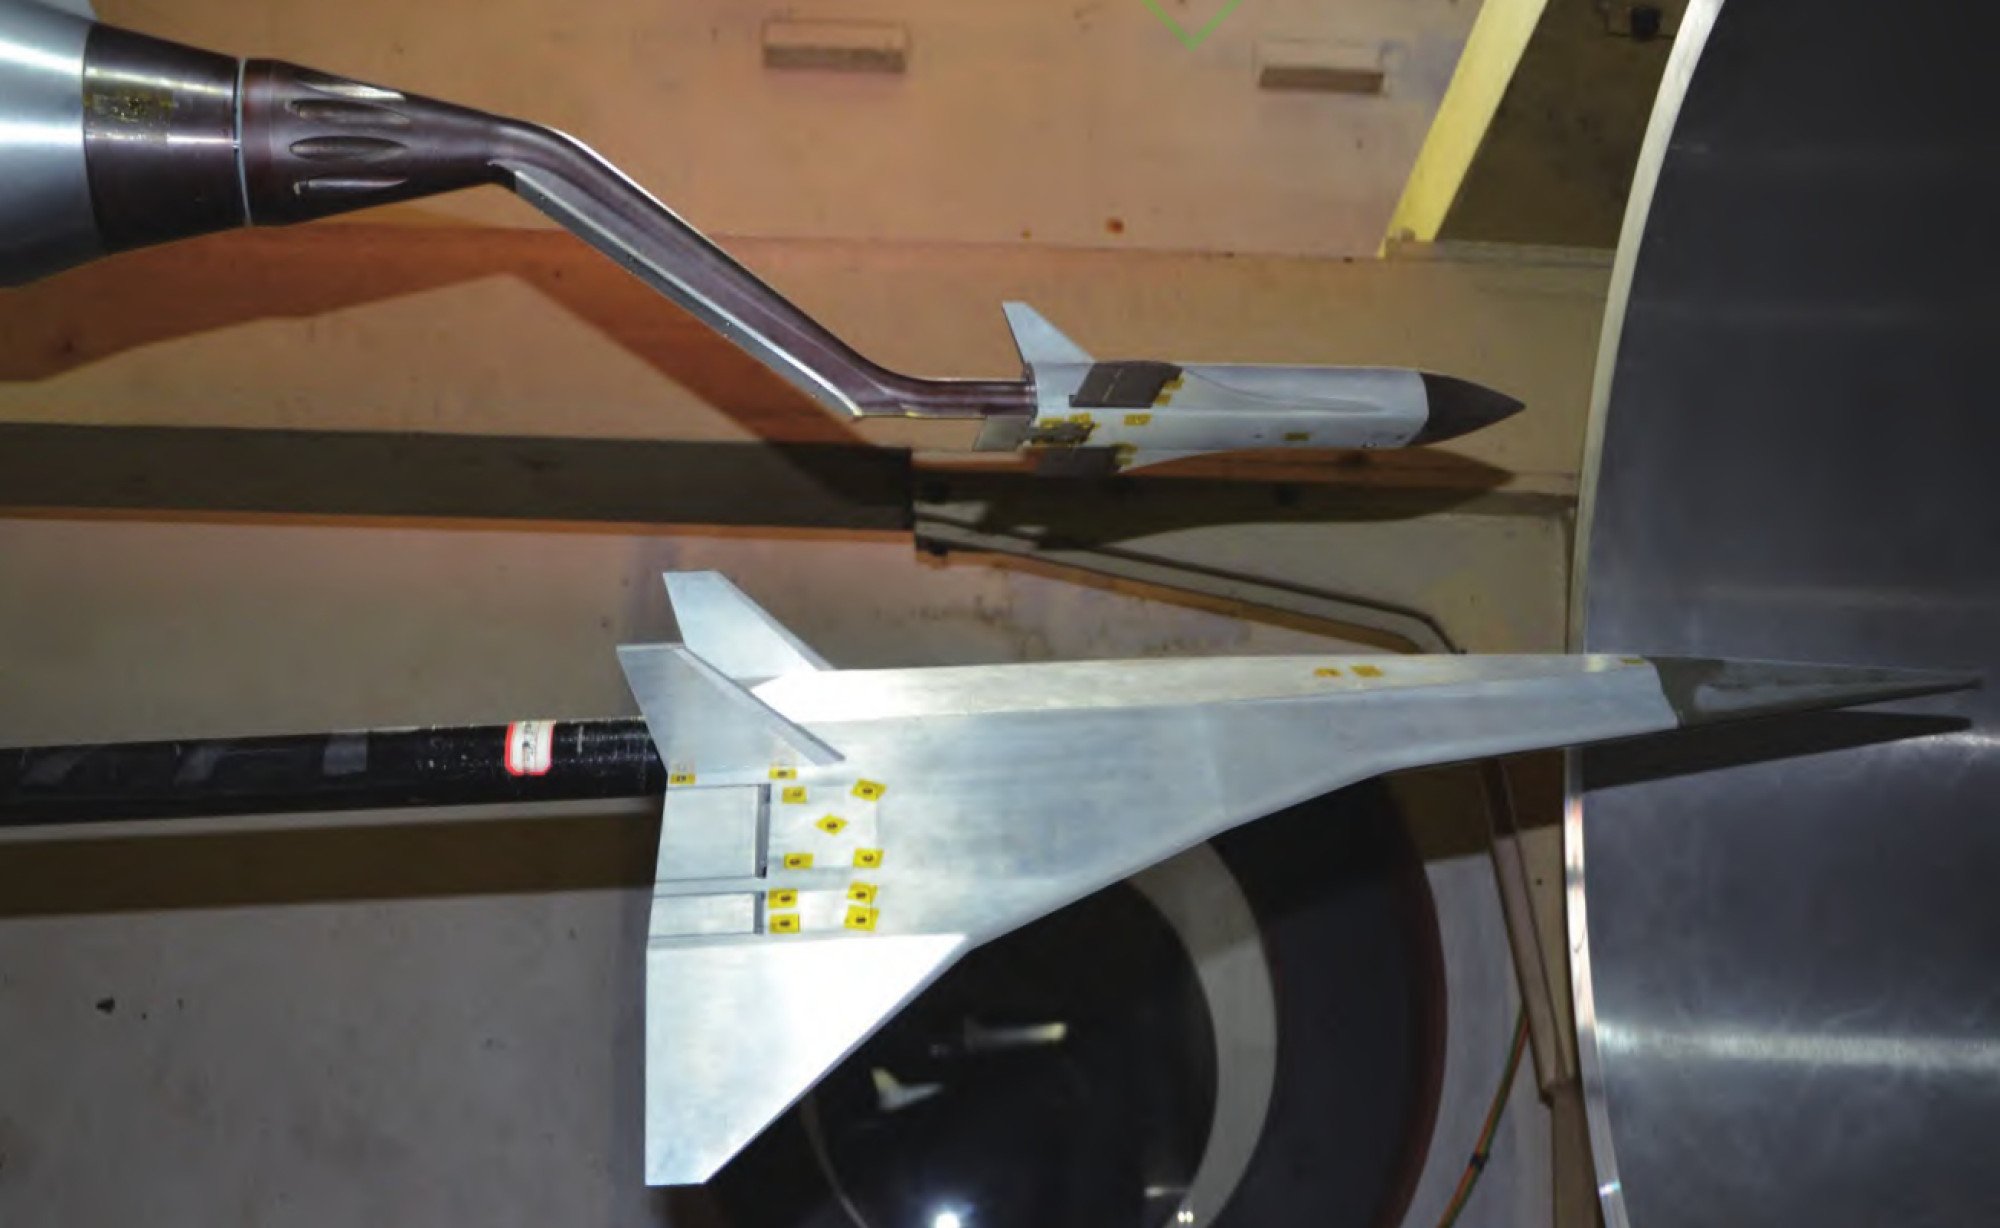 Chinese scientists developed a device that uses robotic arms to hold and tilt prototype planes and their cargo during wind tunnel tests. Credit: Lin Jinzhou